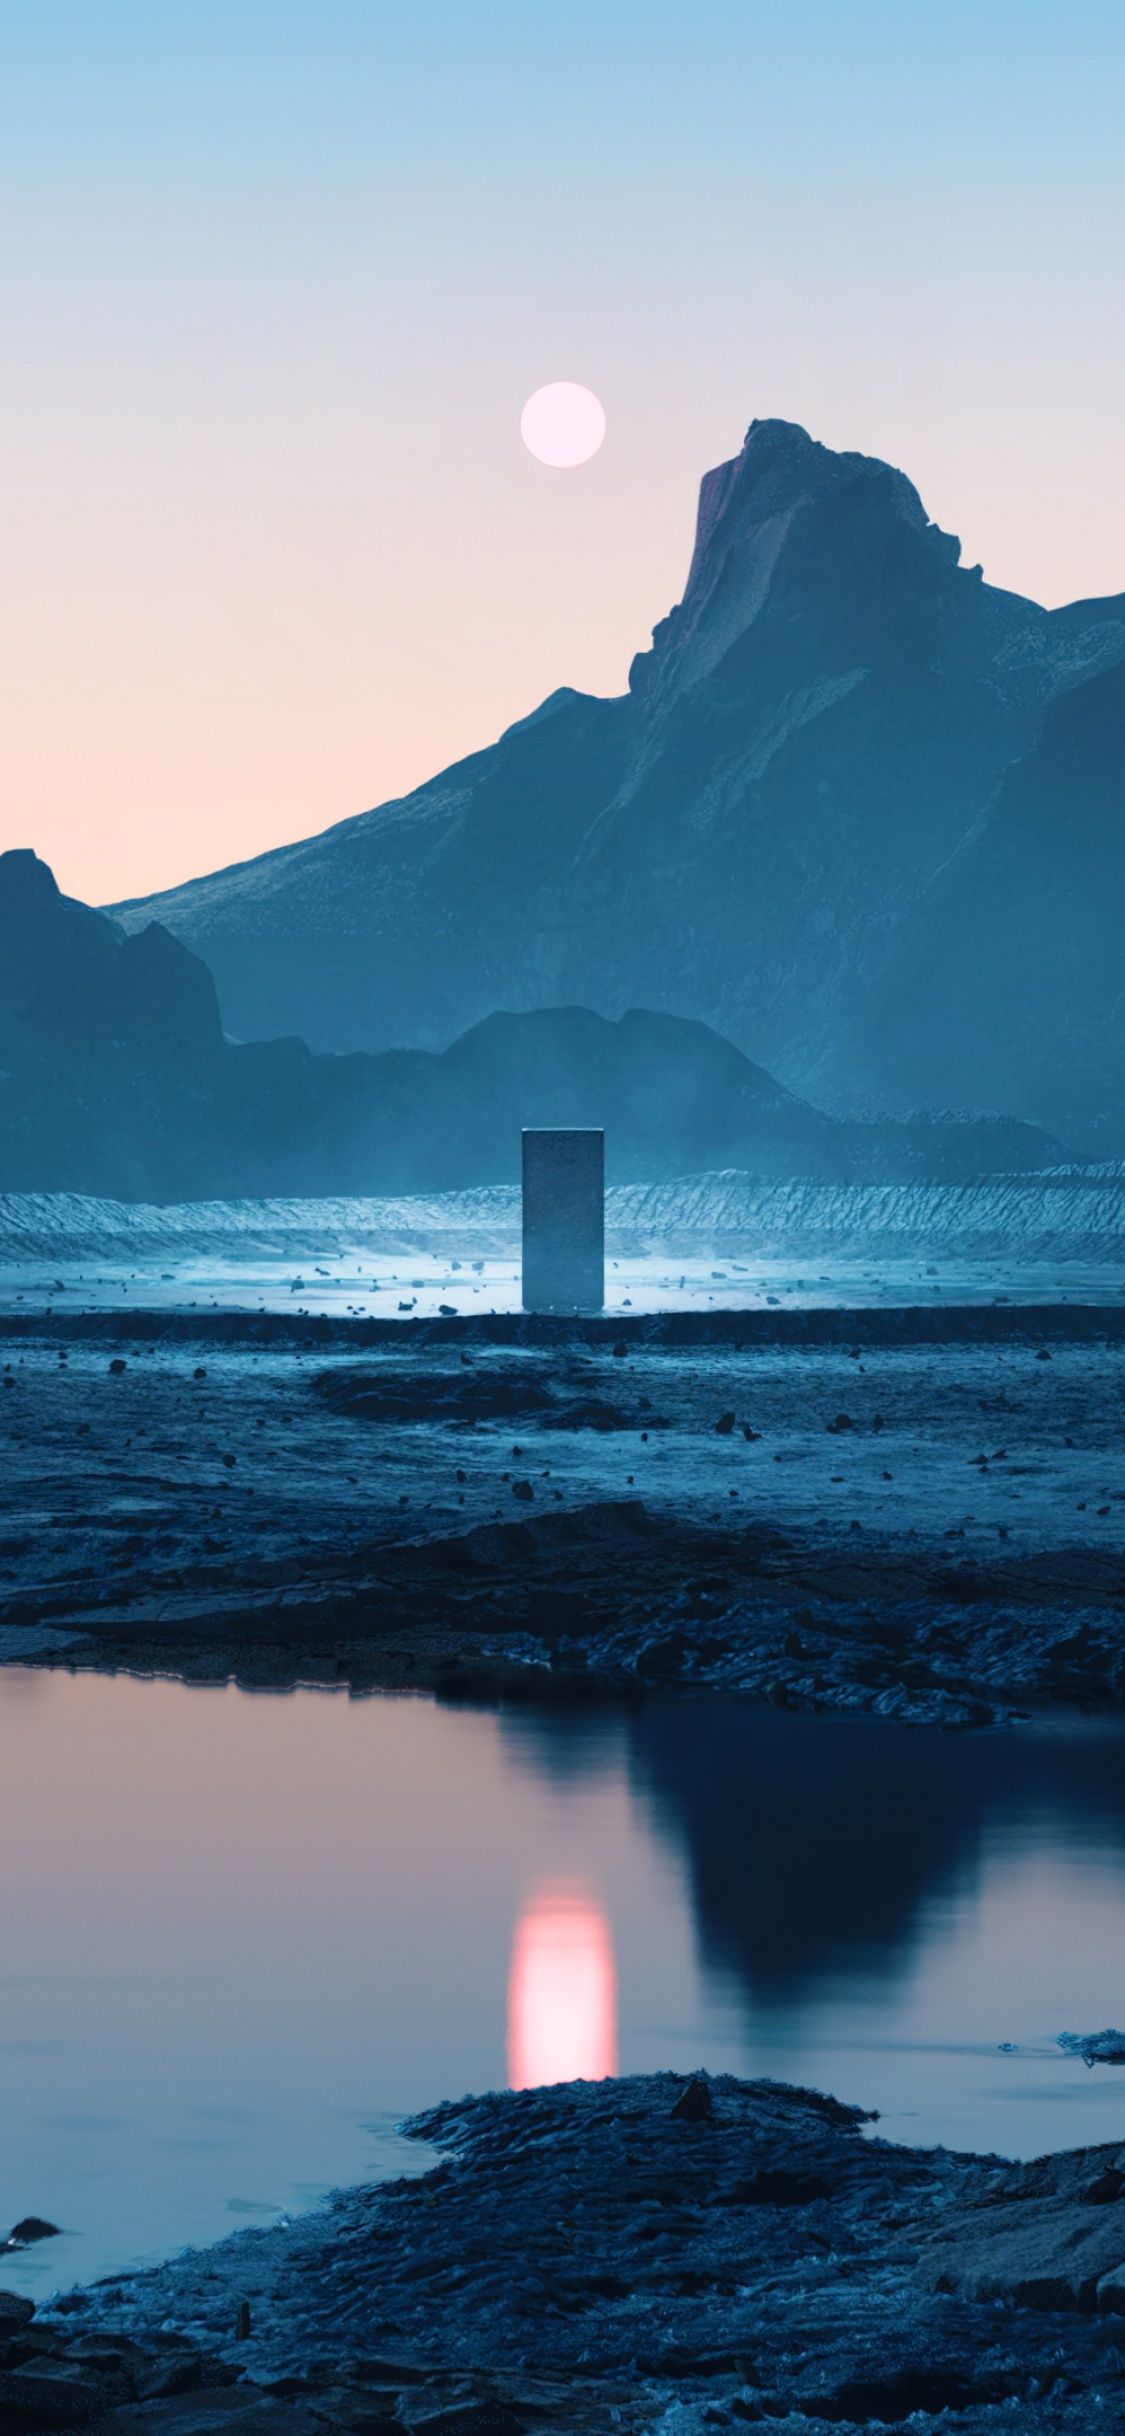 A mysterious monolith has appeared in the middle of a lake in Iceland - Lake